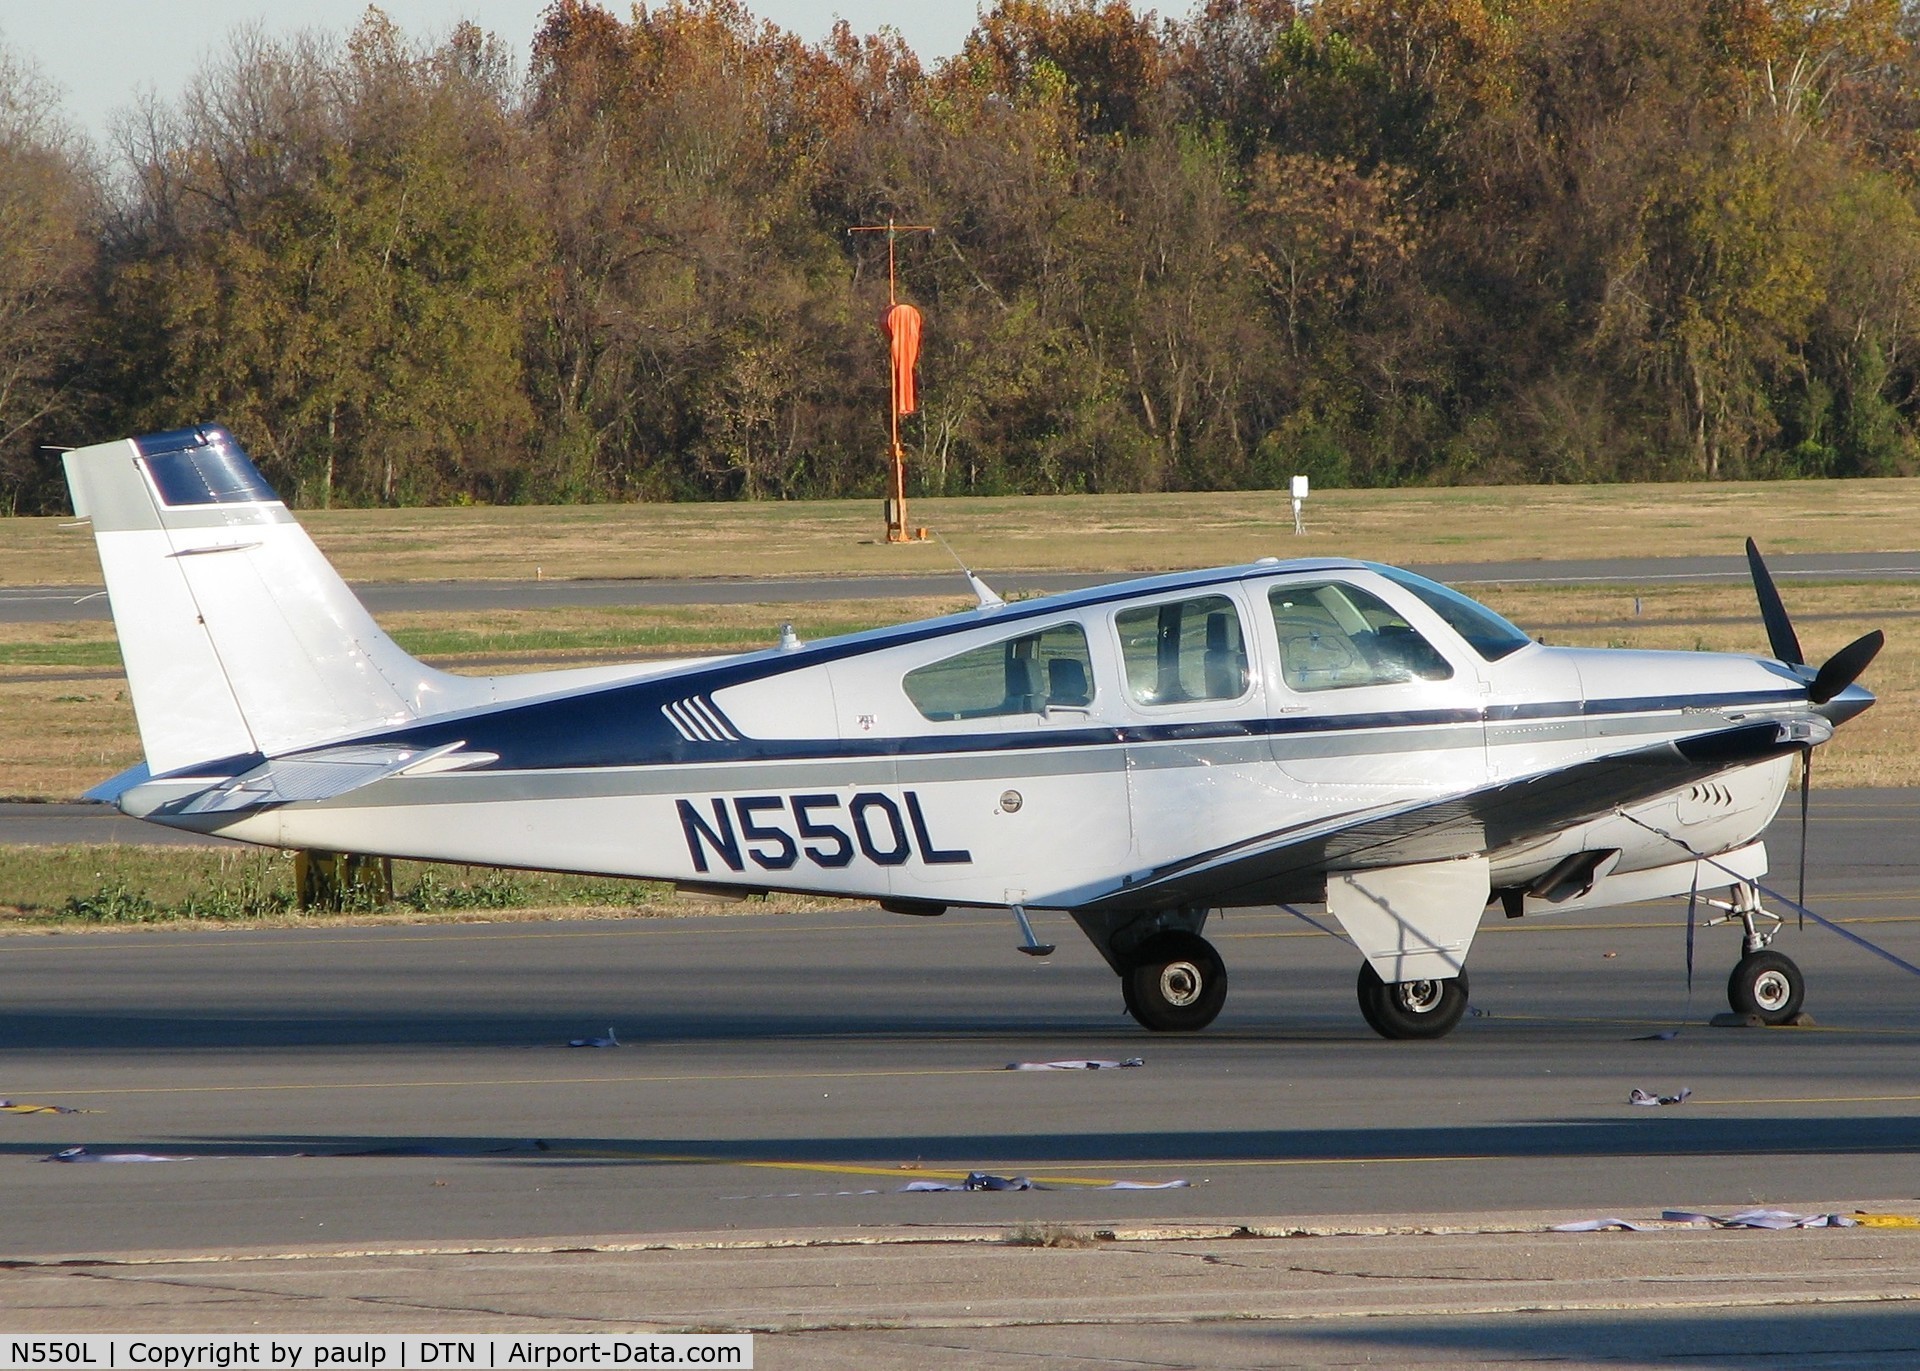 N550L, 1987 Beech F33A Bonanza C/N CE-1190, Parked at Downtown Shreveport.